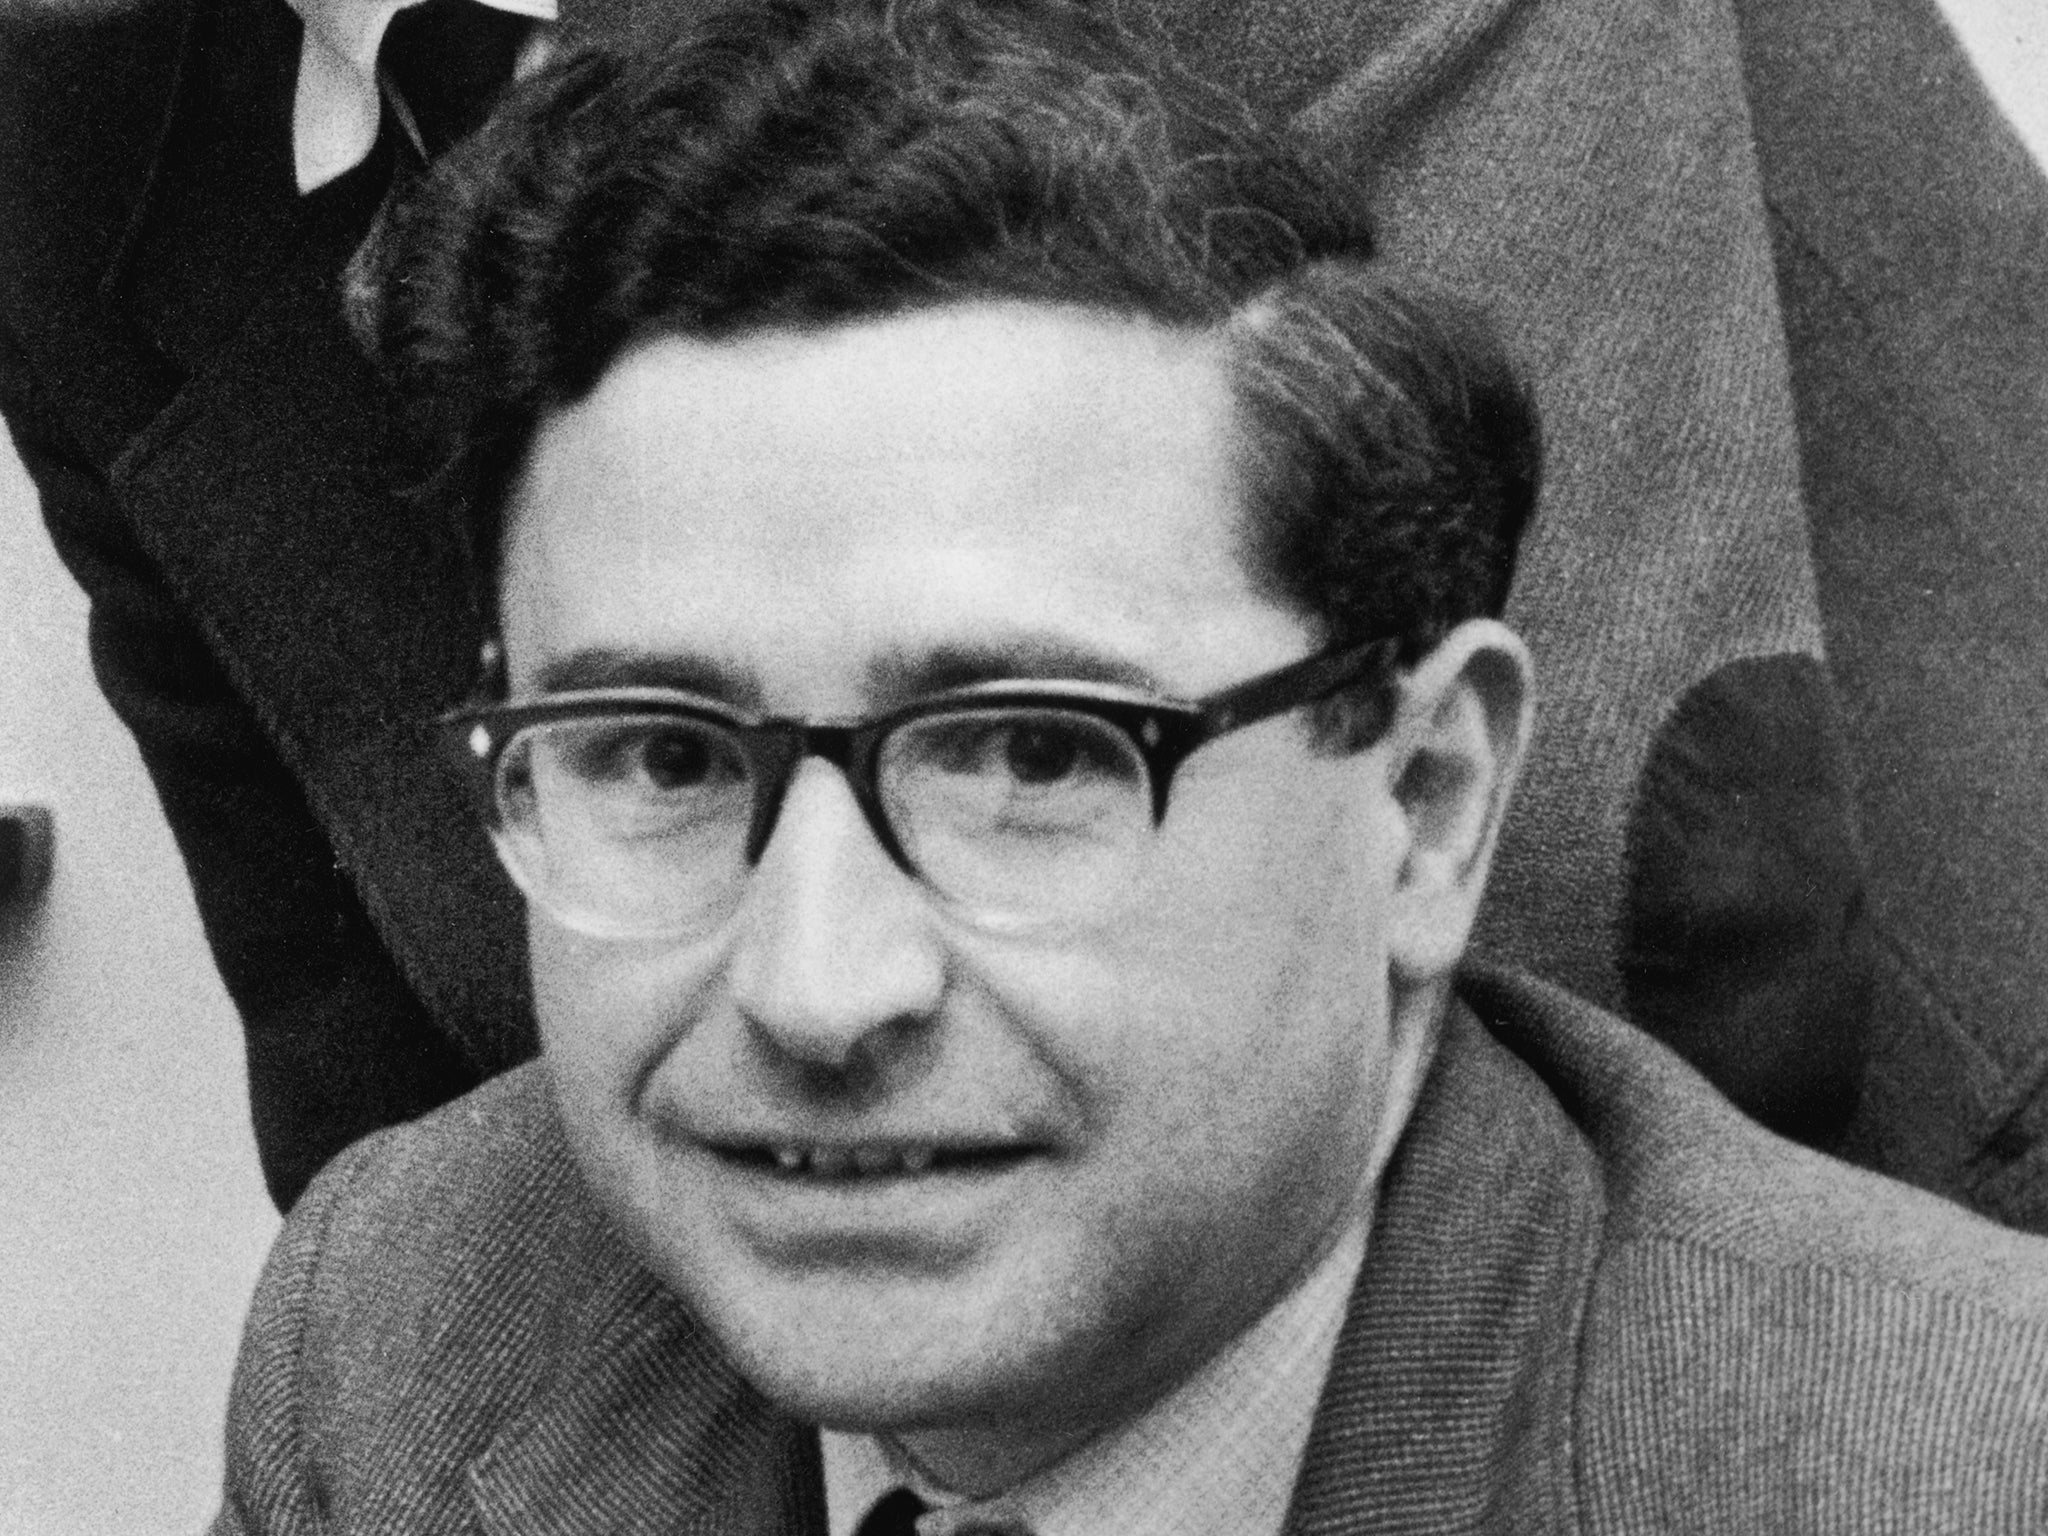 The radio astronomer (pictured in 1961) won the Nobel Prize in Physics in 1974